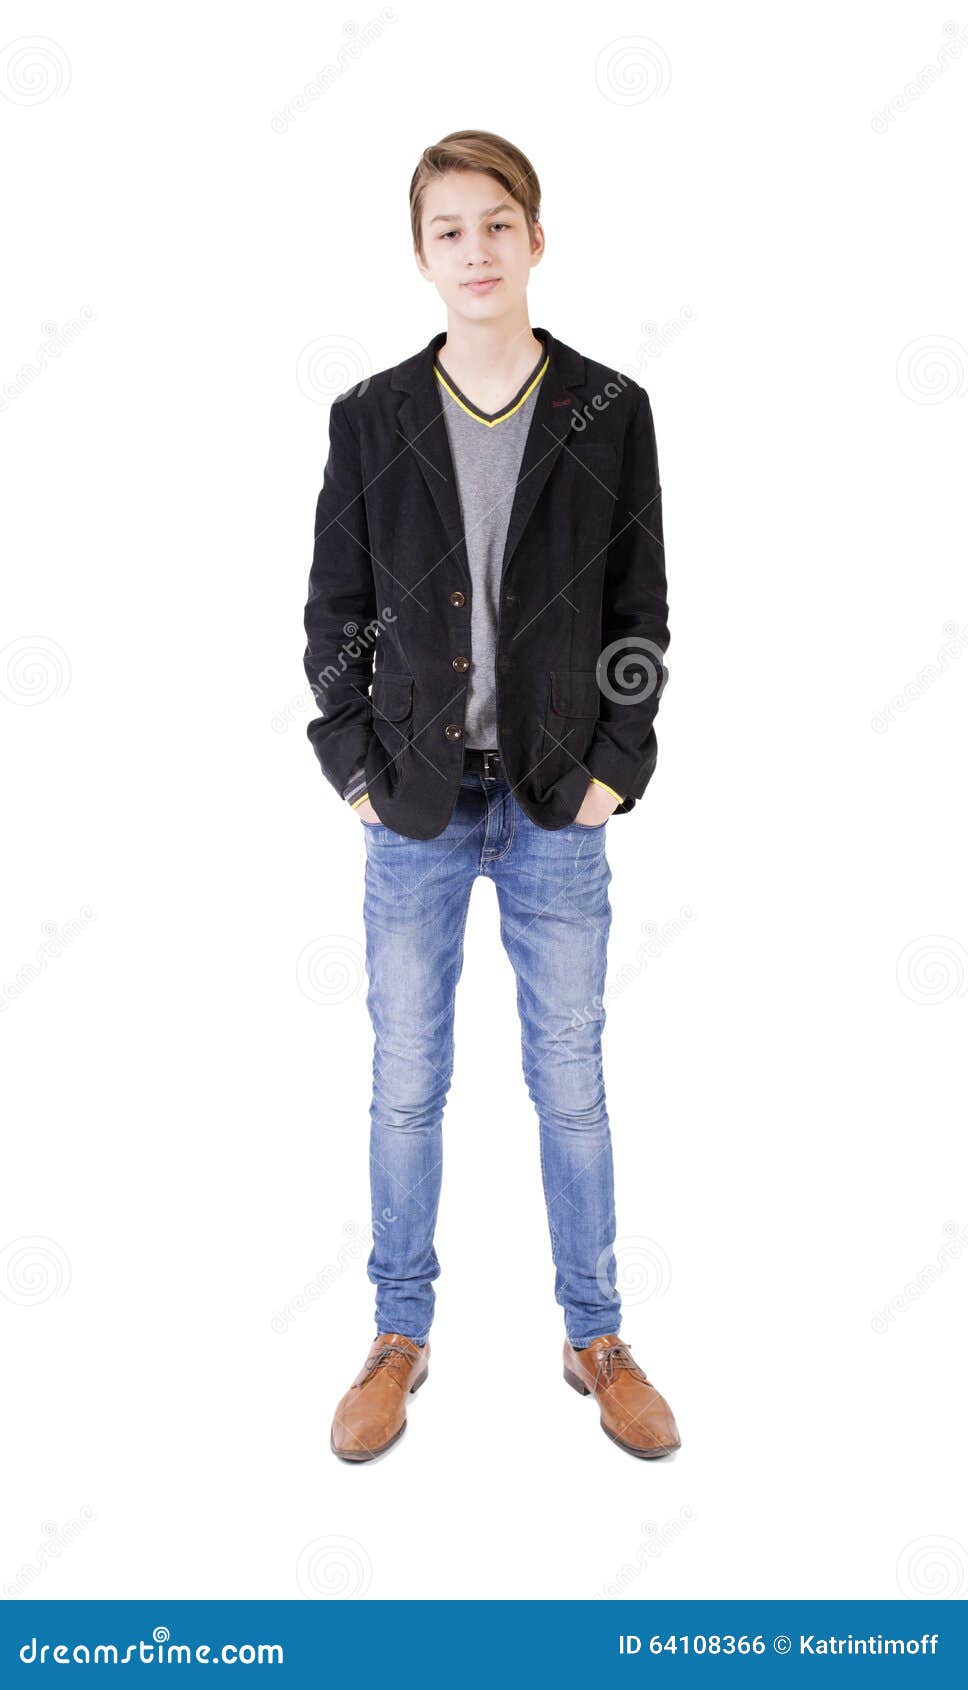 Smiling Caucasian Sad Teen Boy Standing at Full Height Stock Photo - Image  of jacket, smile: 64108366